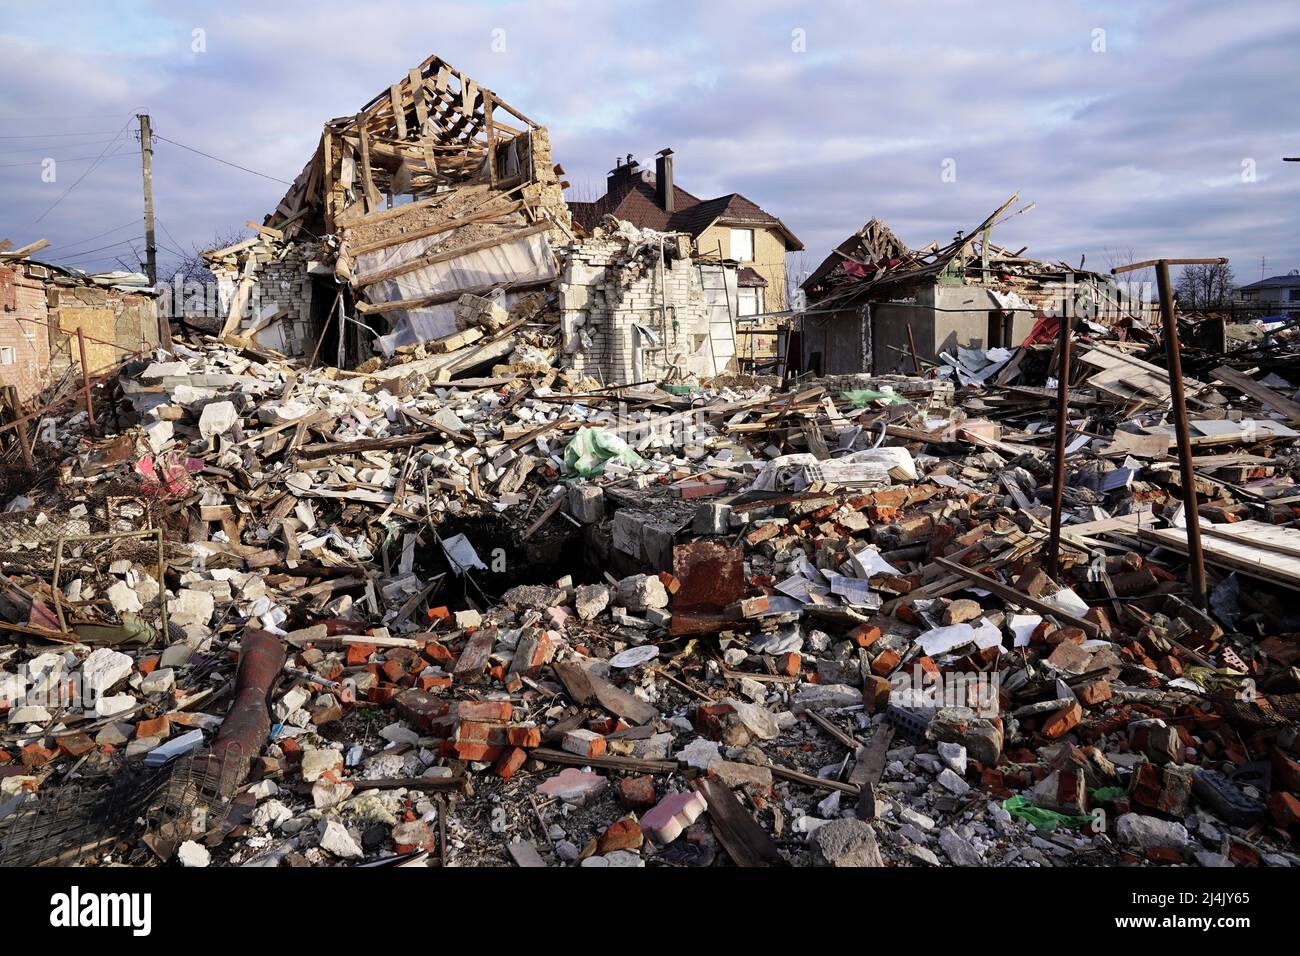 SUMY, UKRAINE - APRIL 14, 2022 - The houses destroyed by Russian shelling lie in ruins, Sumy, northeastern Ukraine. Stock Photo